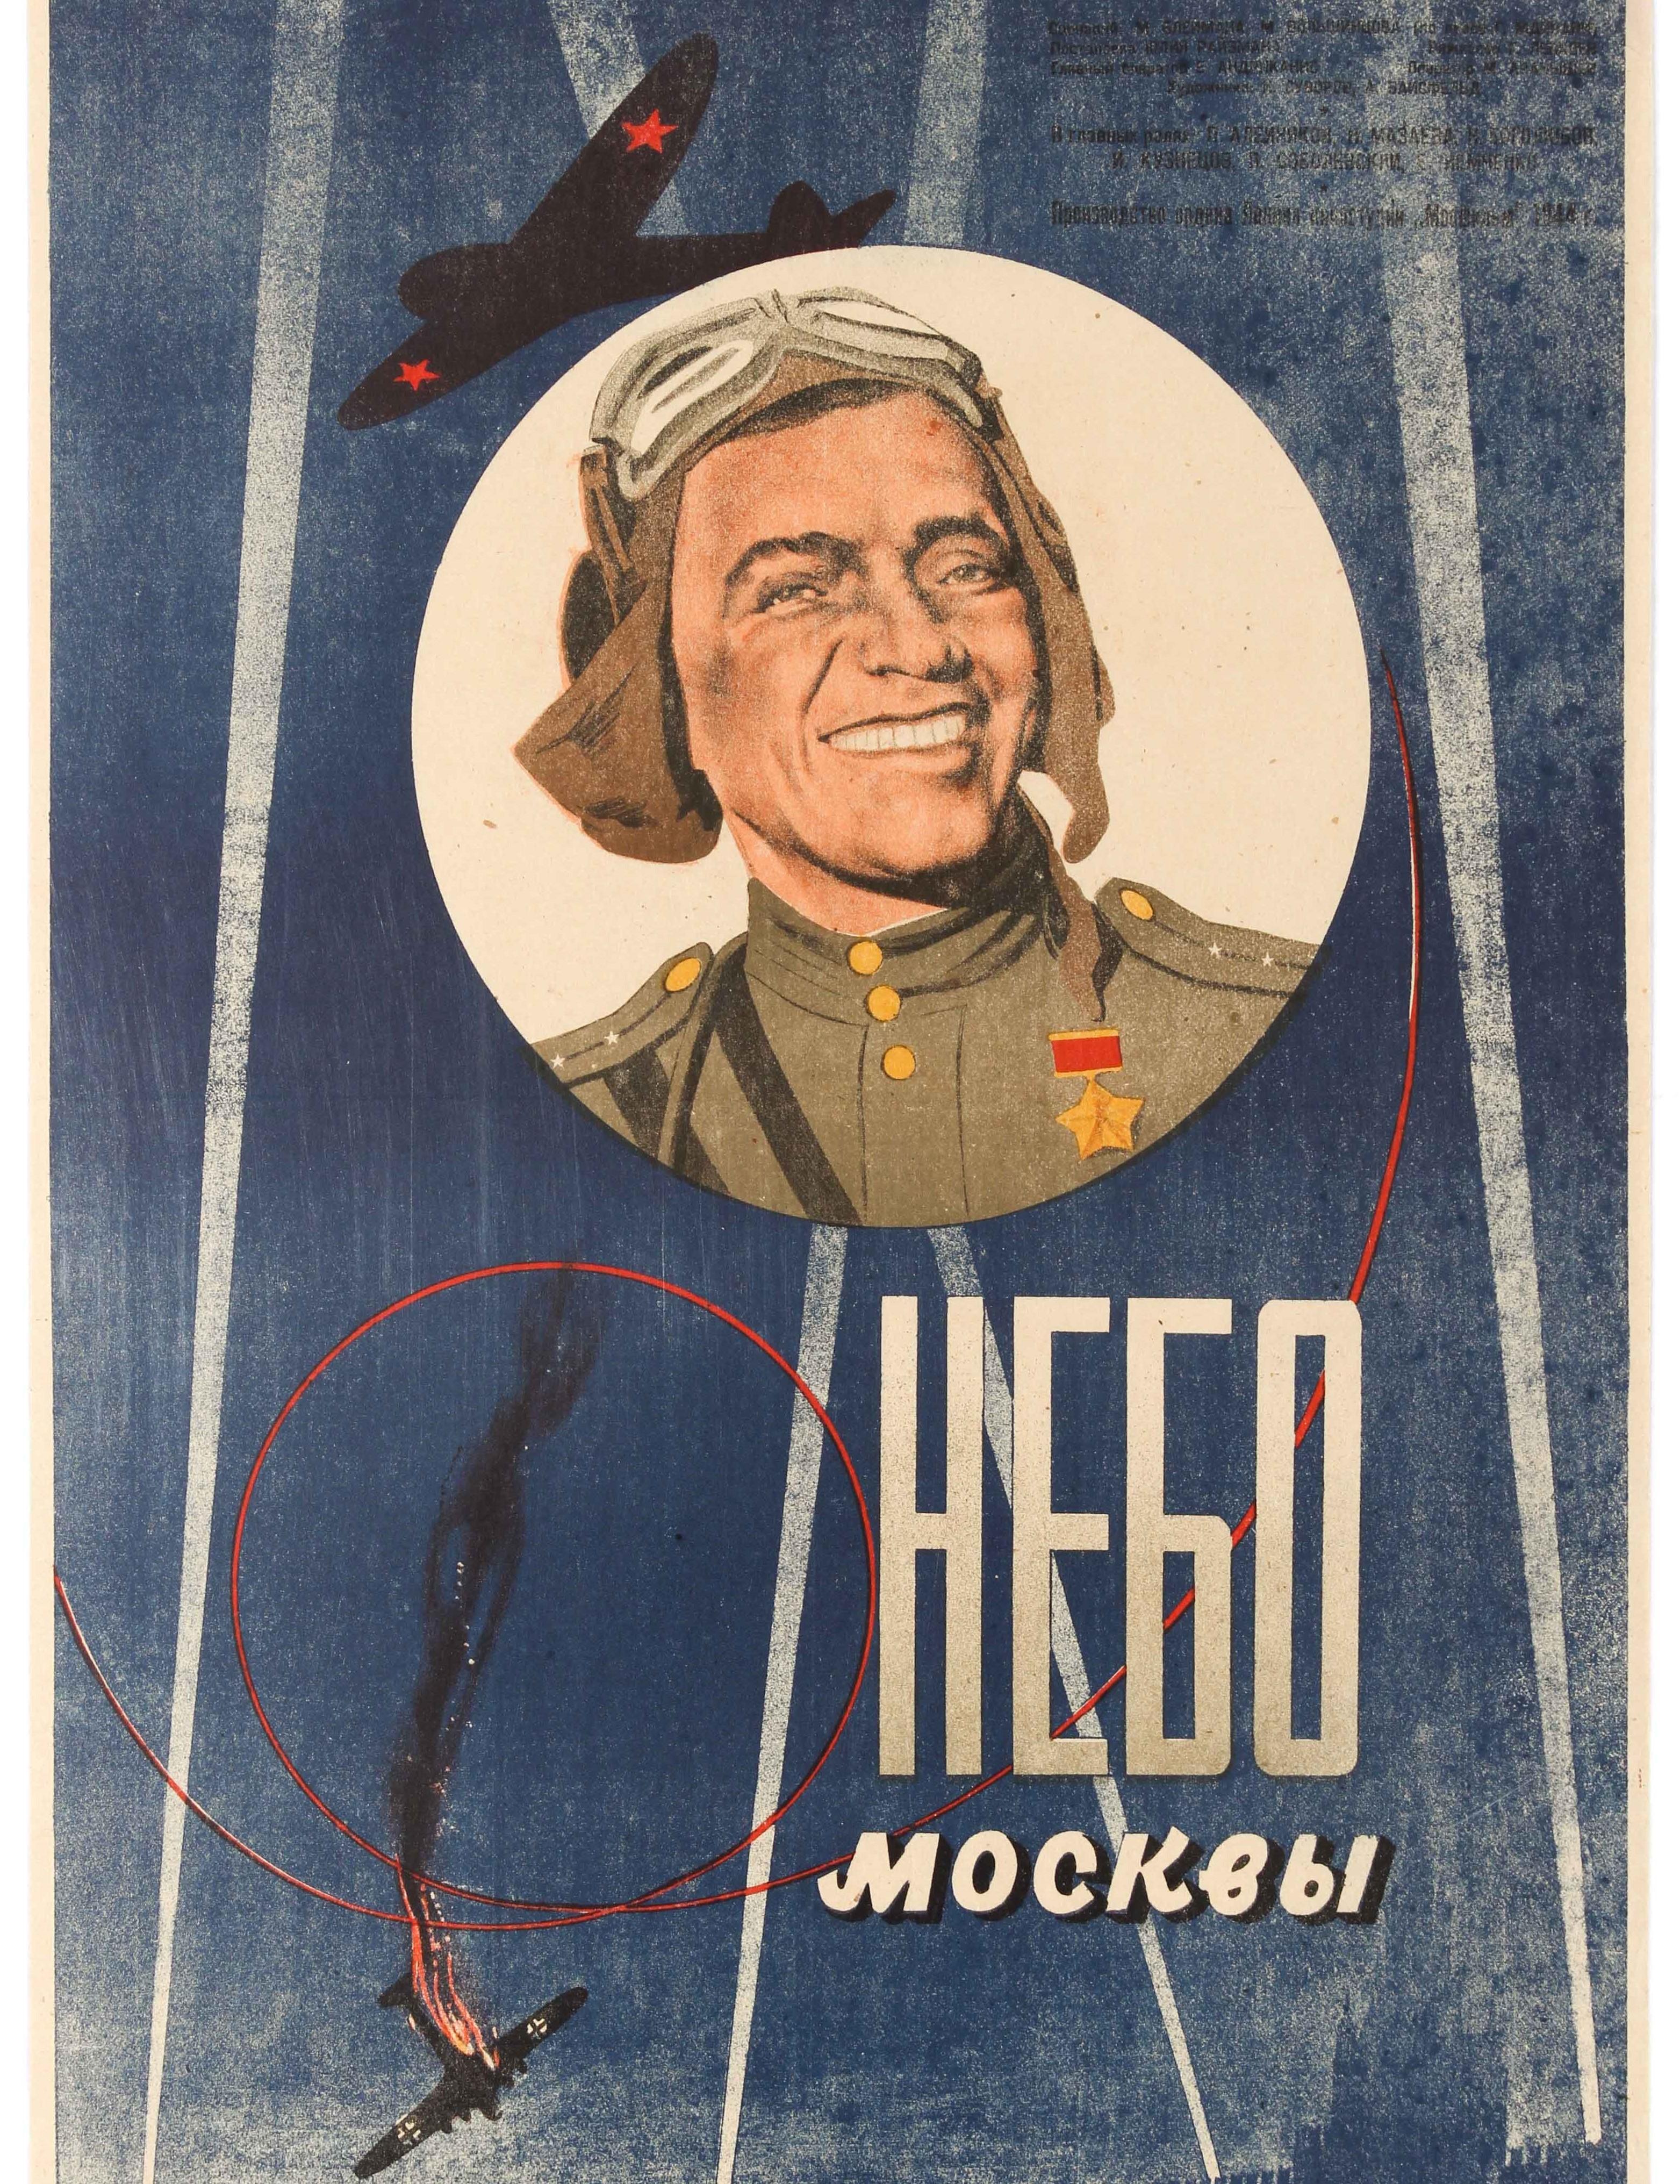 Russian Original Vintage Poster Moscow Skies Soviet Fighter Pilot WWII Film Nebo Moskvy